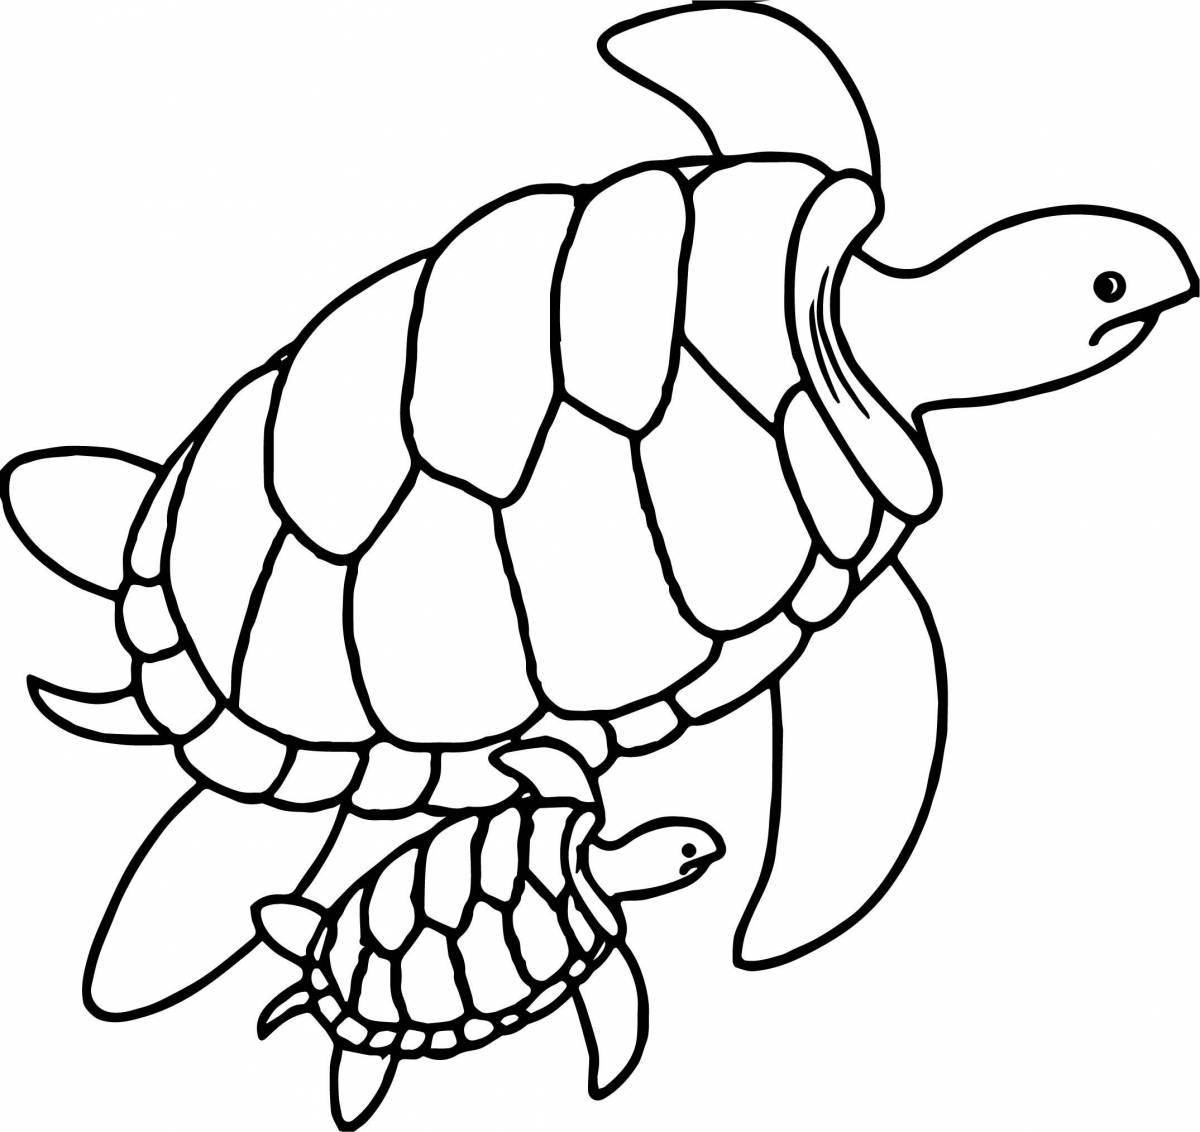 Adorable sea turtle coloring book for kids